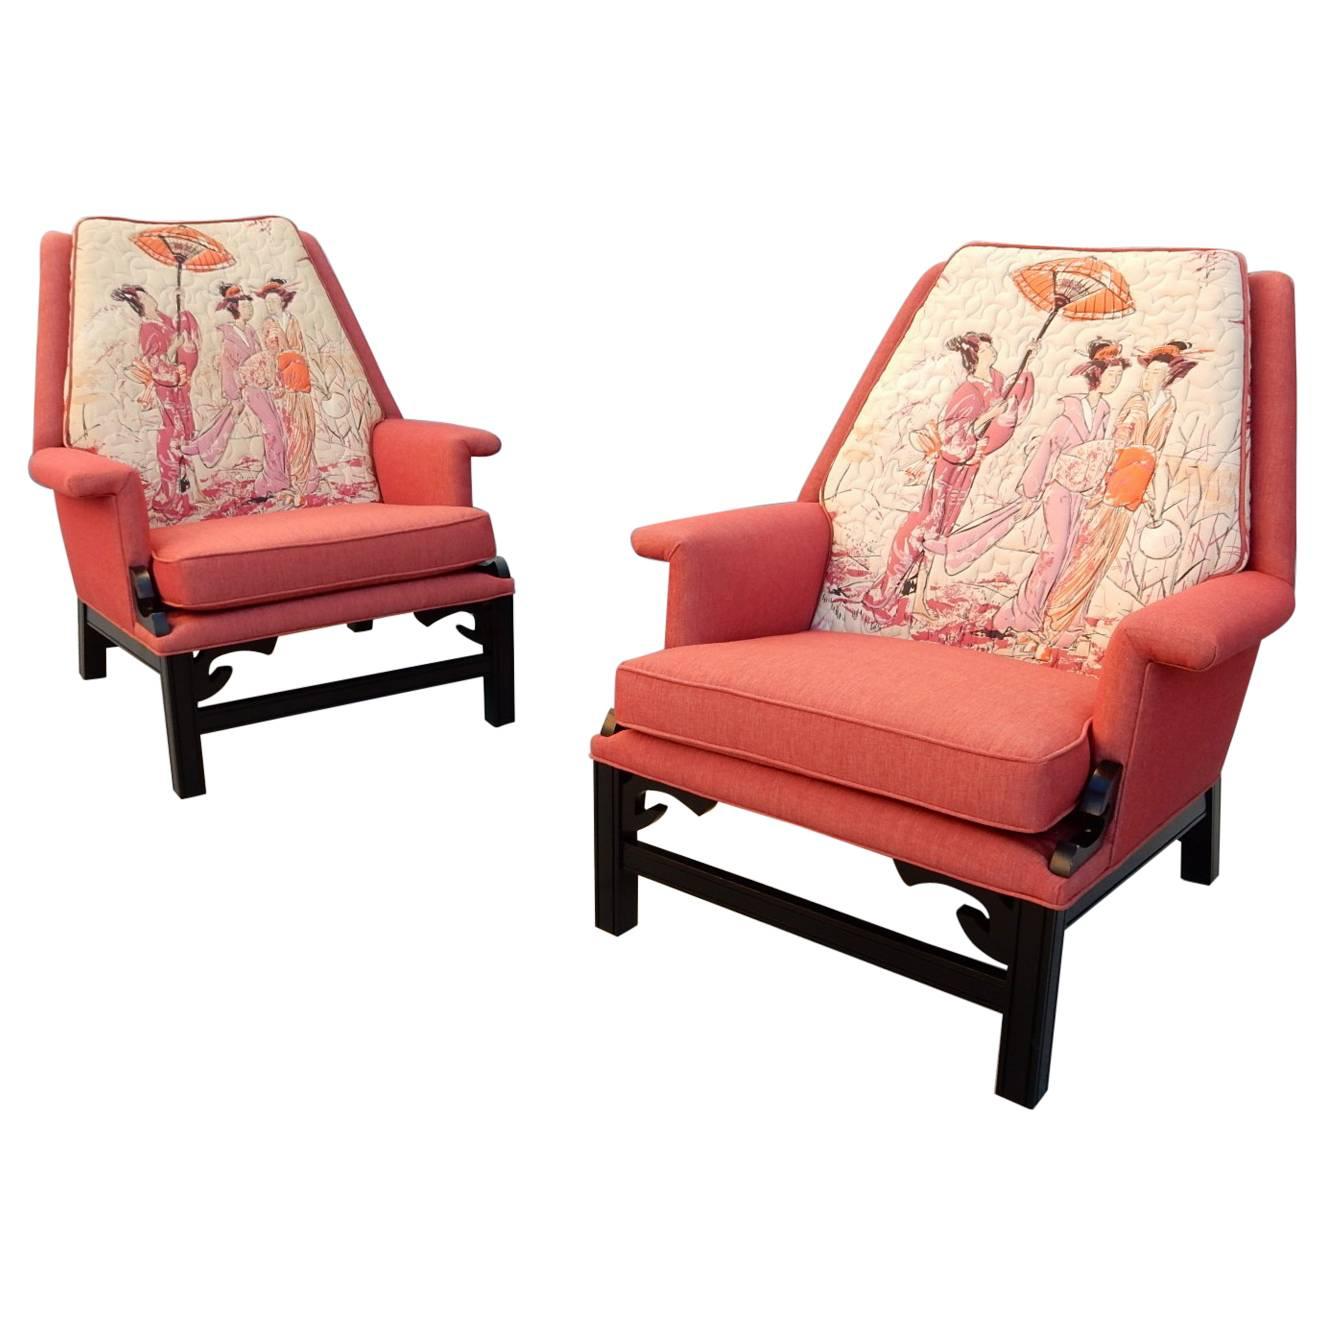 1950s style of James Mont Design Asian Modern Lounge Chairs Geisha Girl